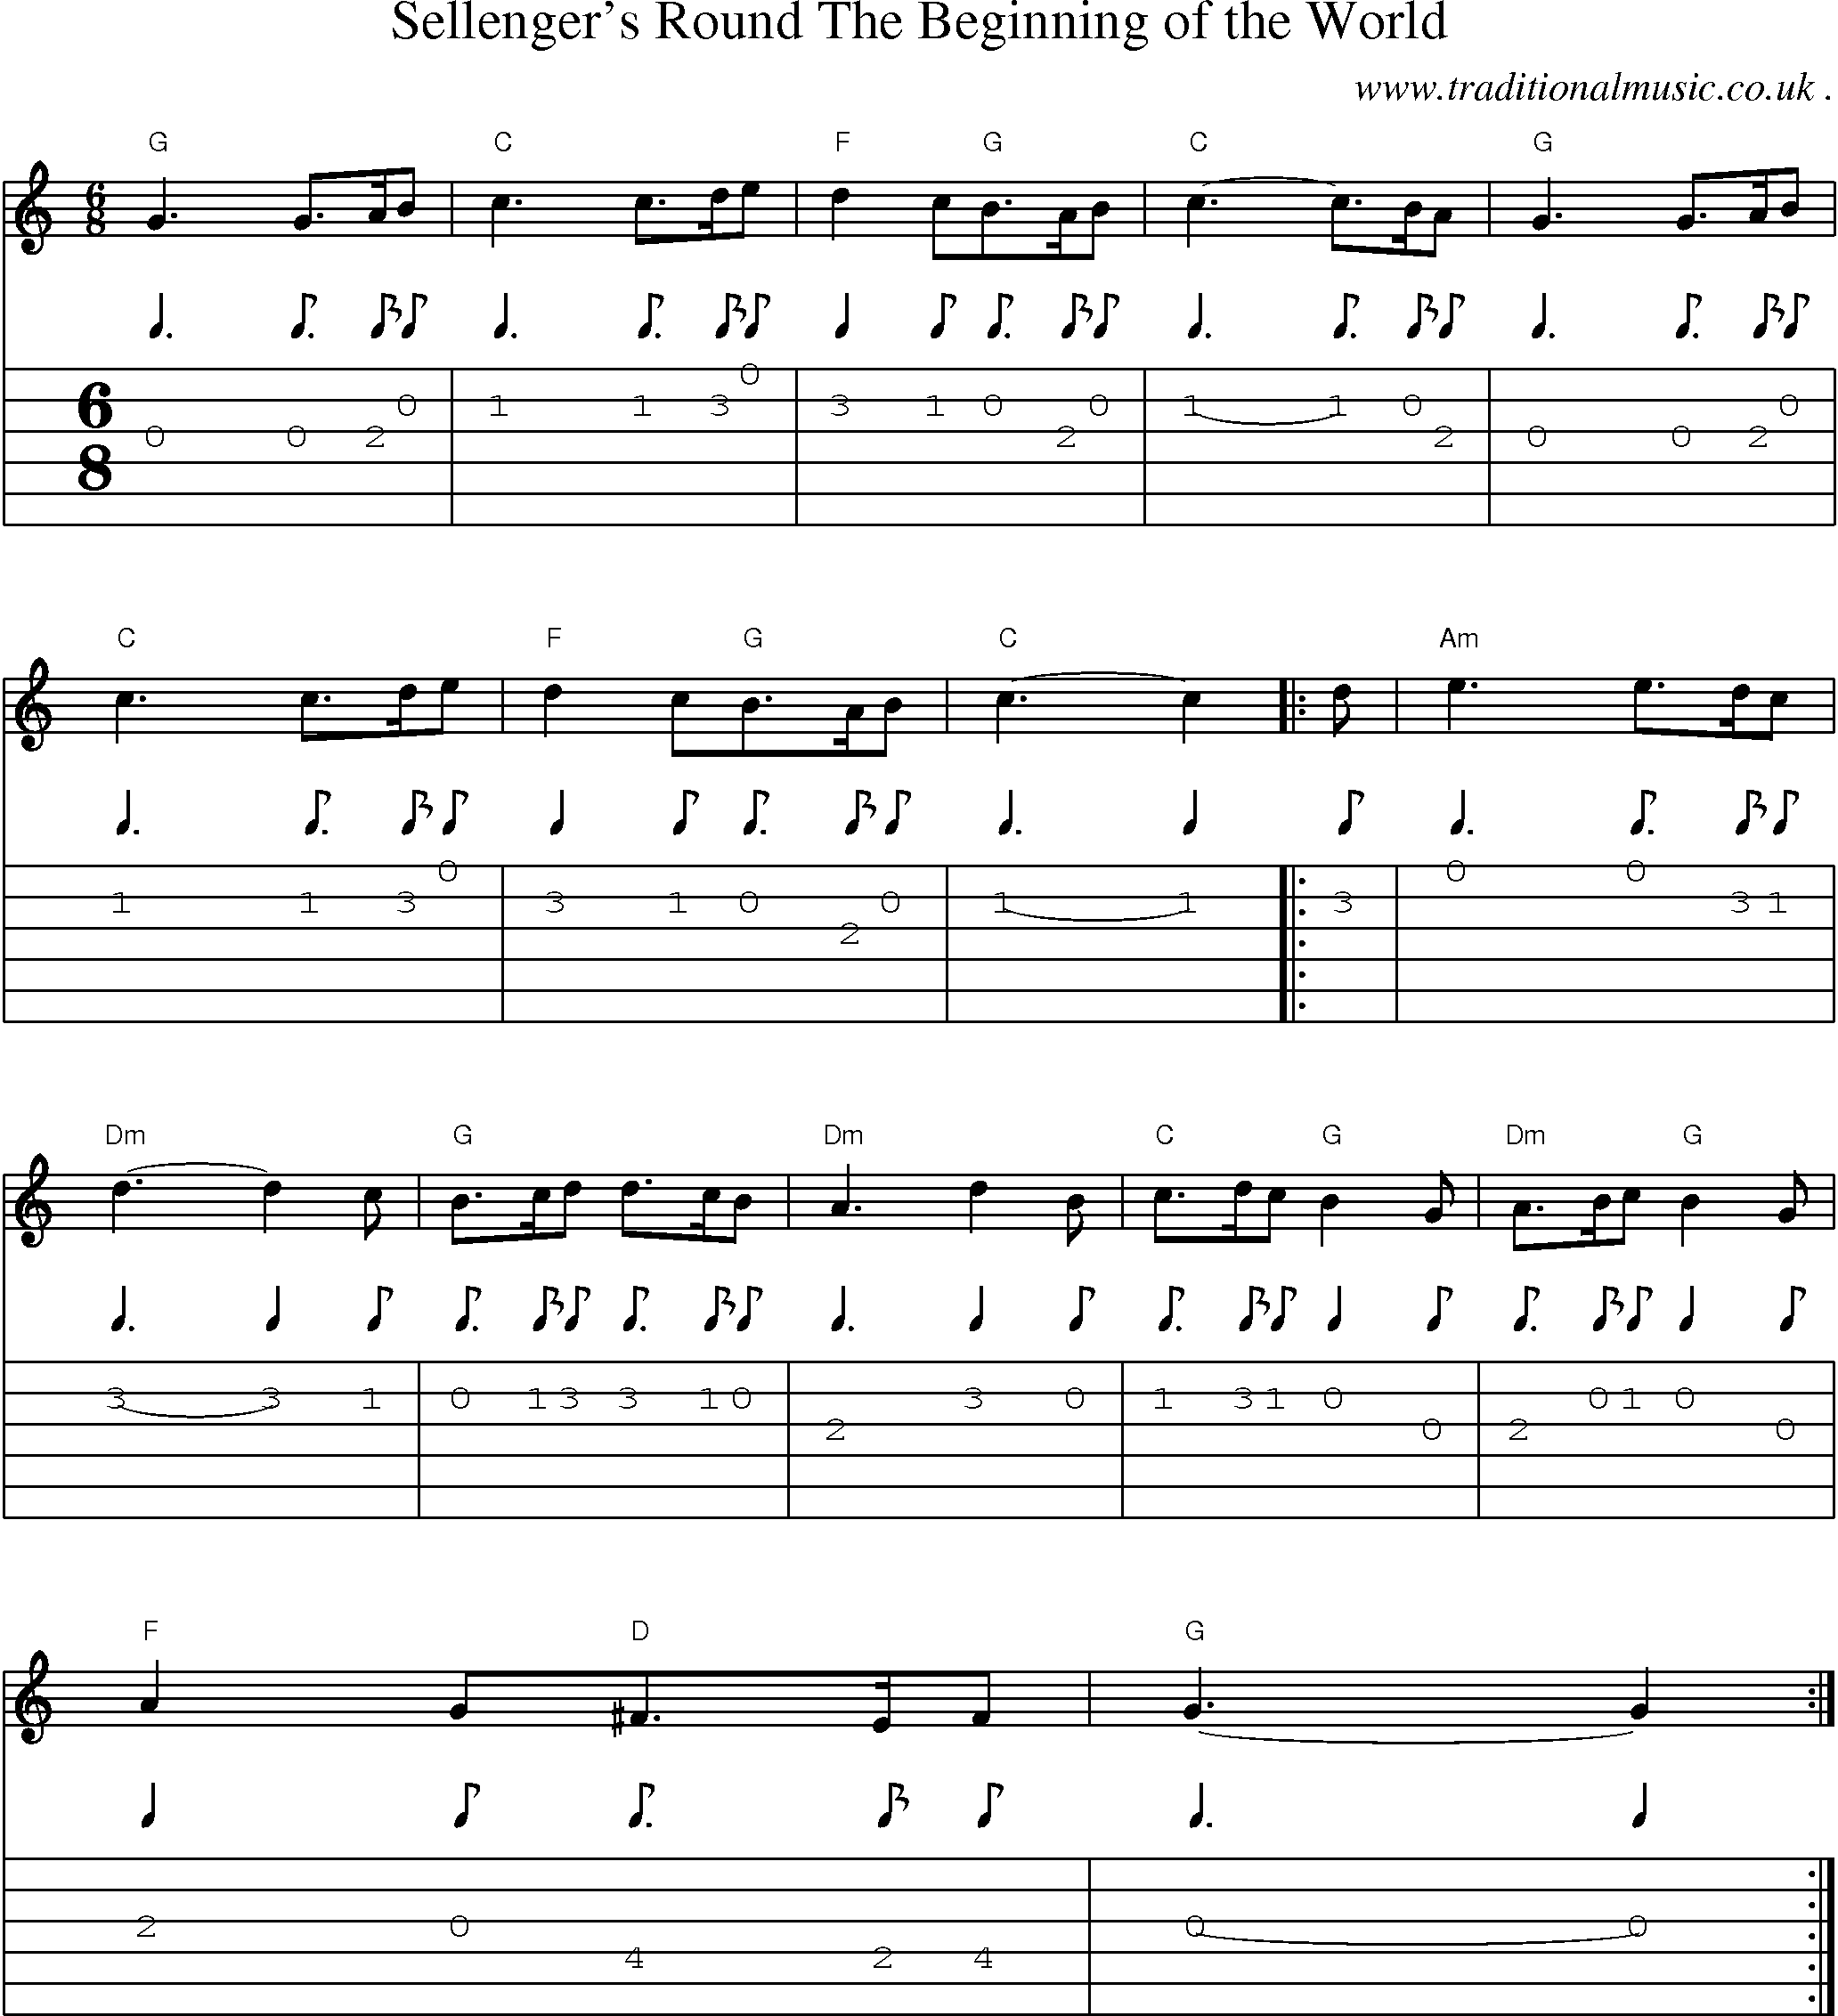 Sheet-Music and Guitar Tabs for Sellengers Round The Beginning Of The World